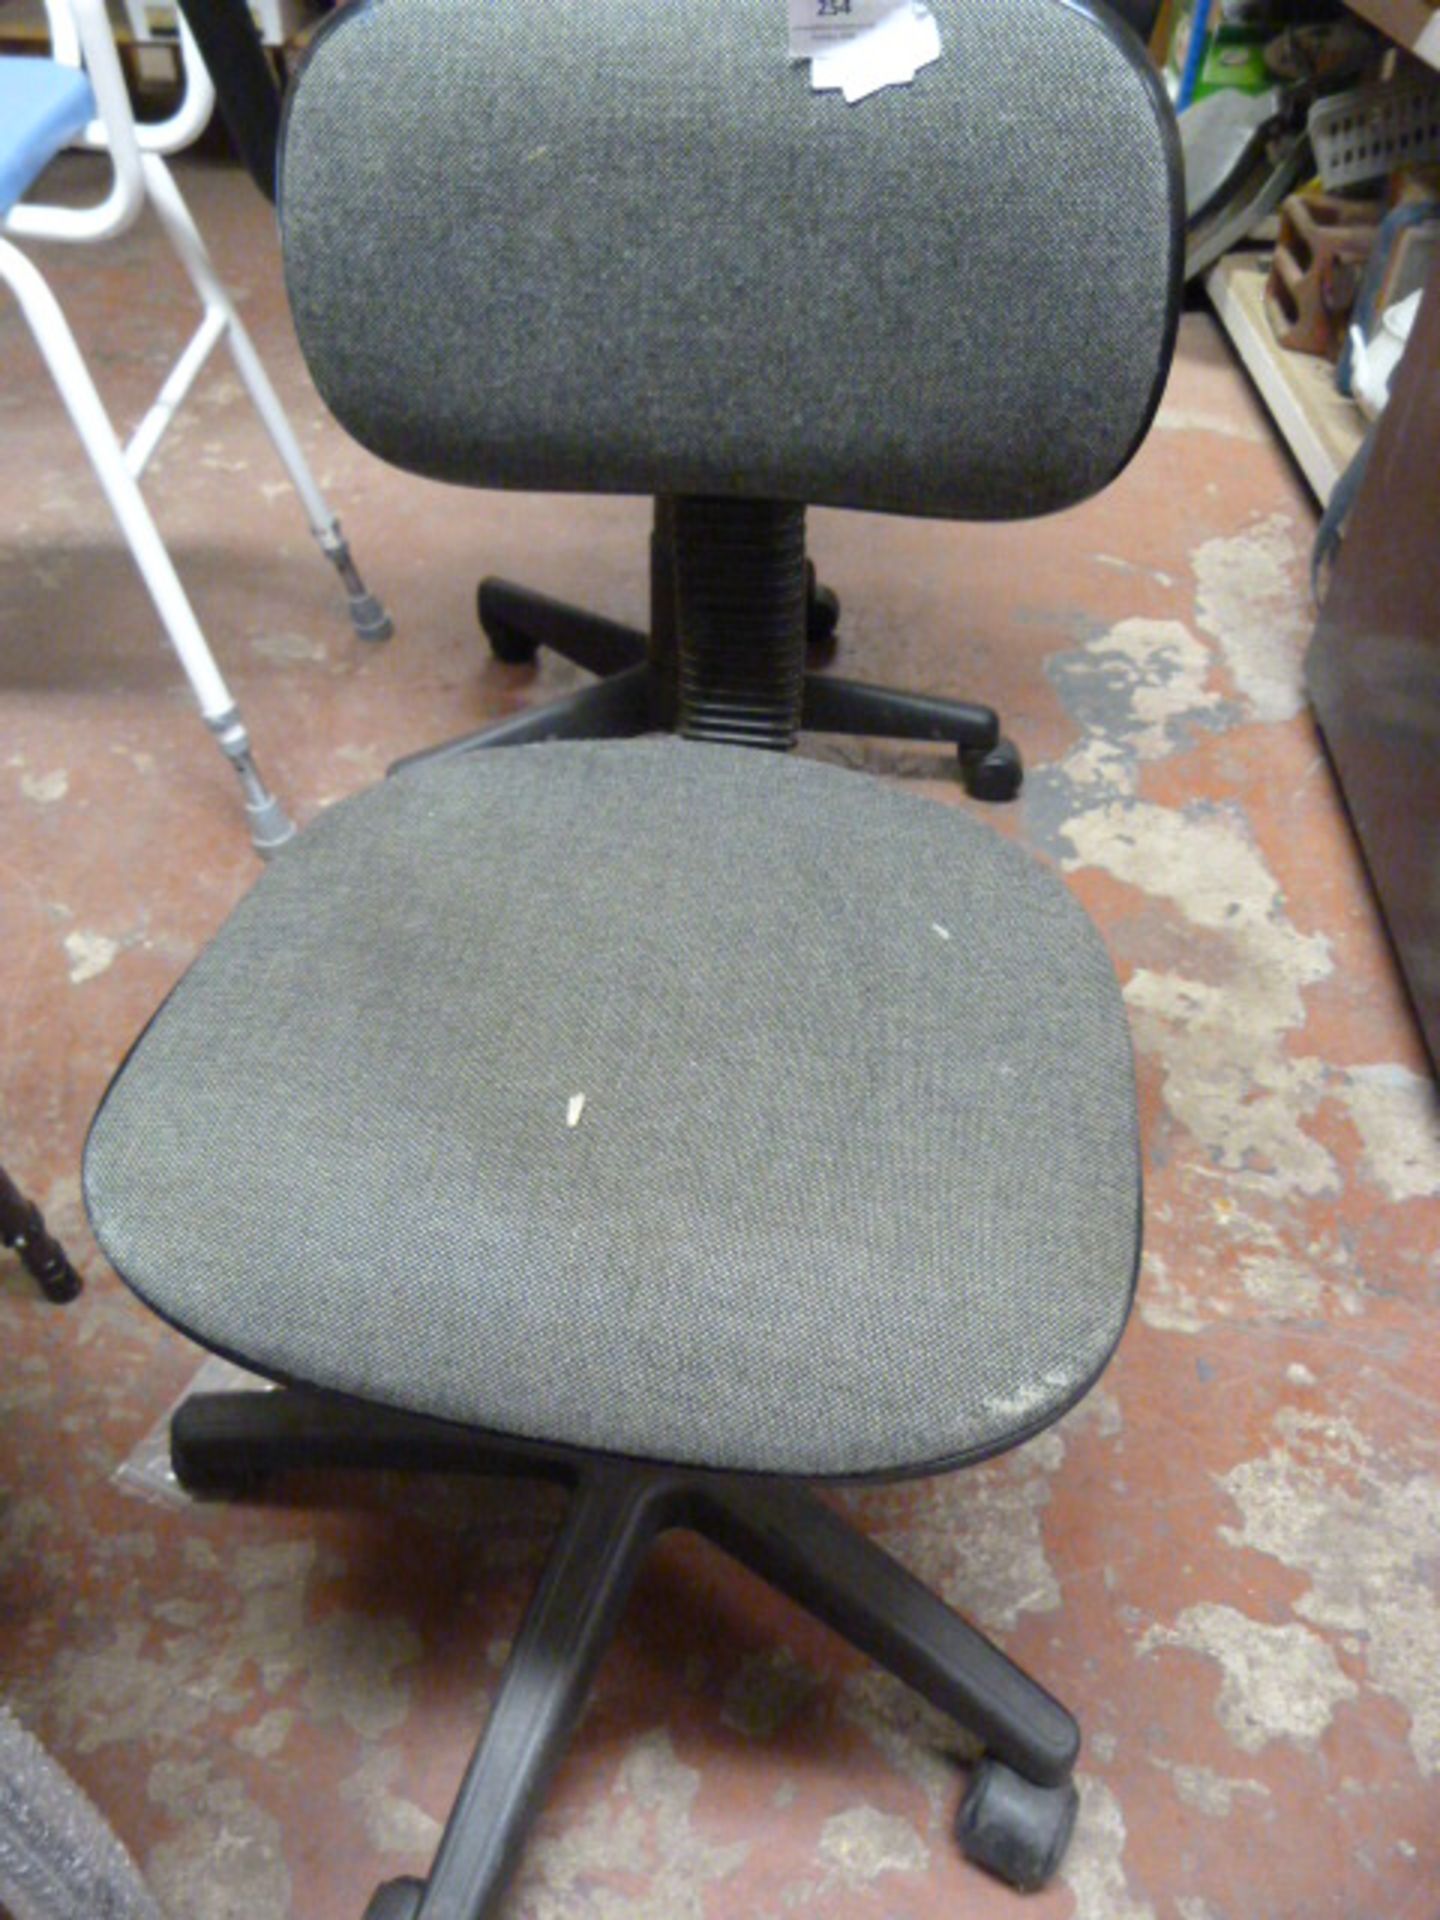 Grey Office Chair